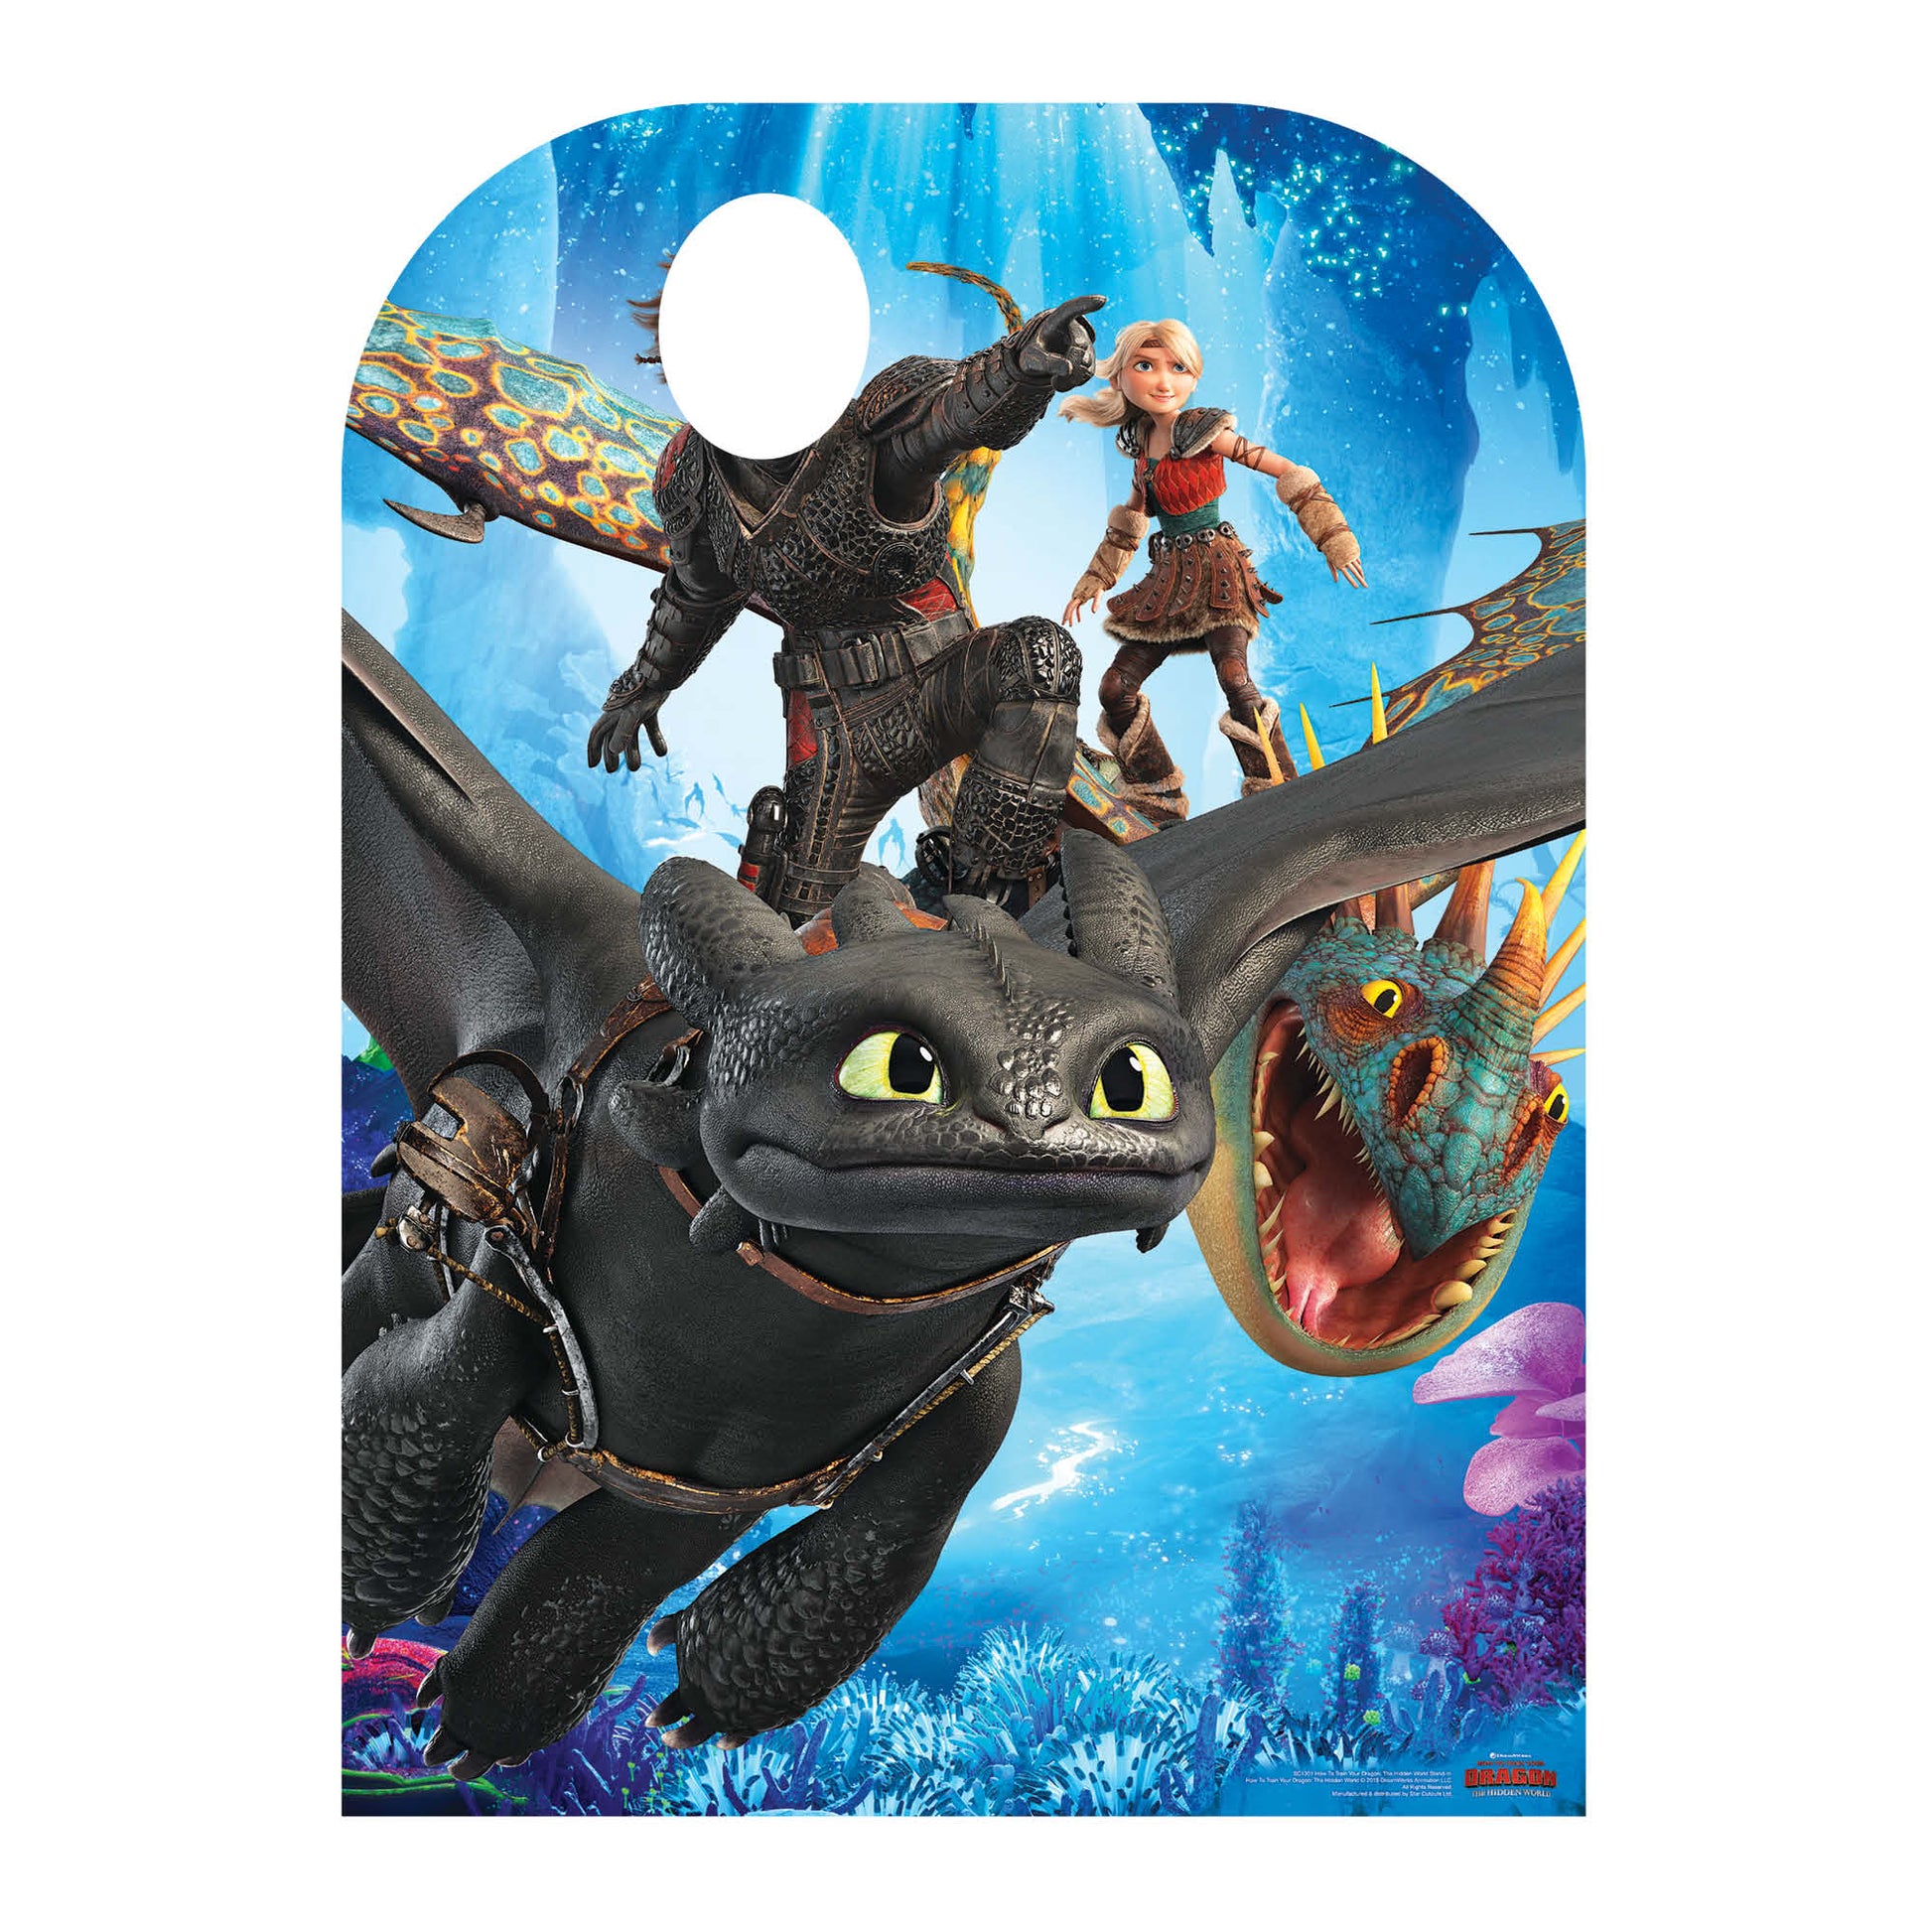  How to Train Your Dragon 3 Stand-In Toothless Hiccup Stormfly Astrid How To Train Your Dragon Cardboard Cutout